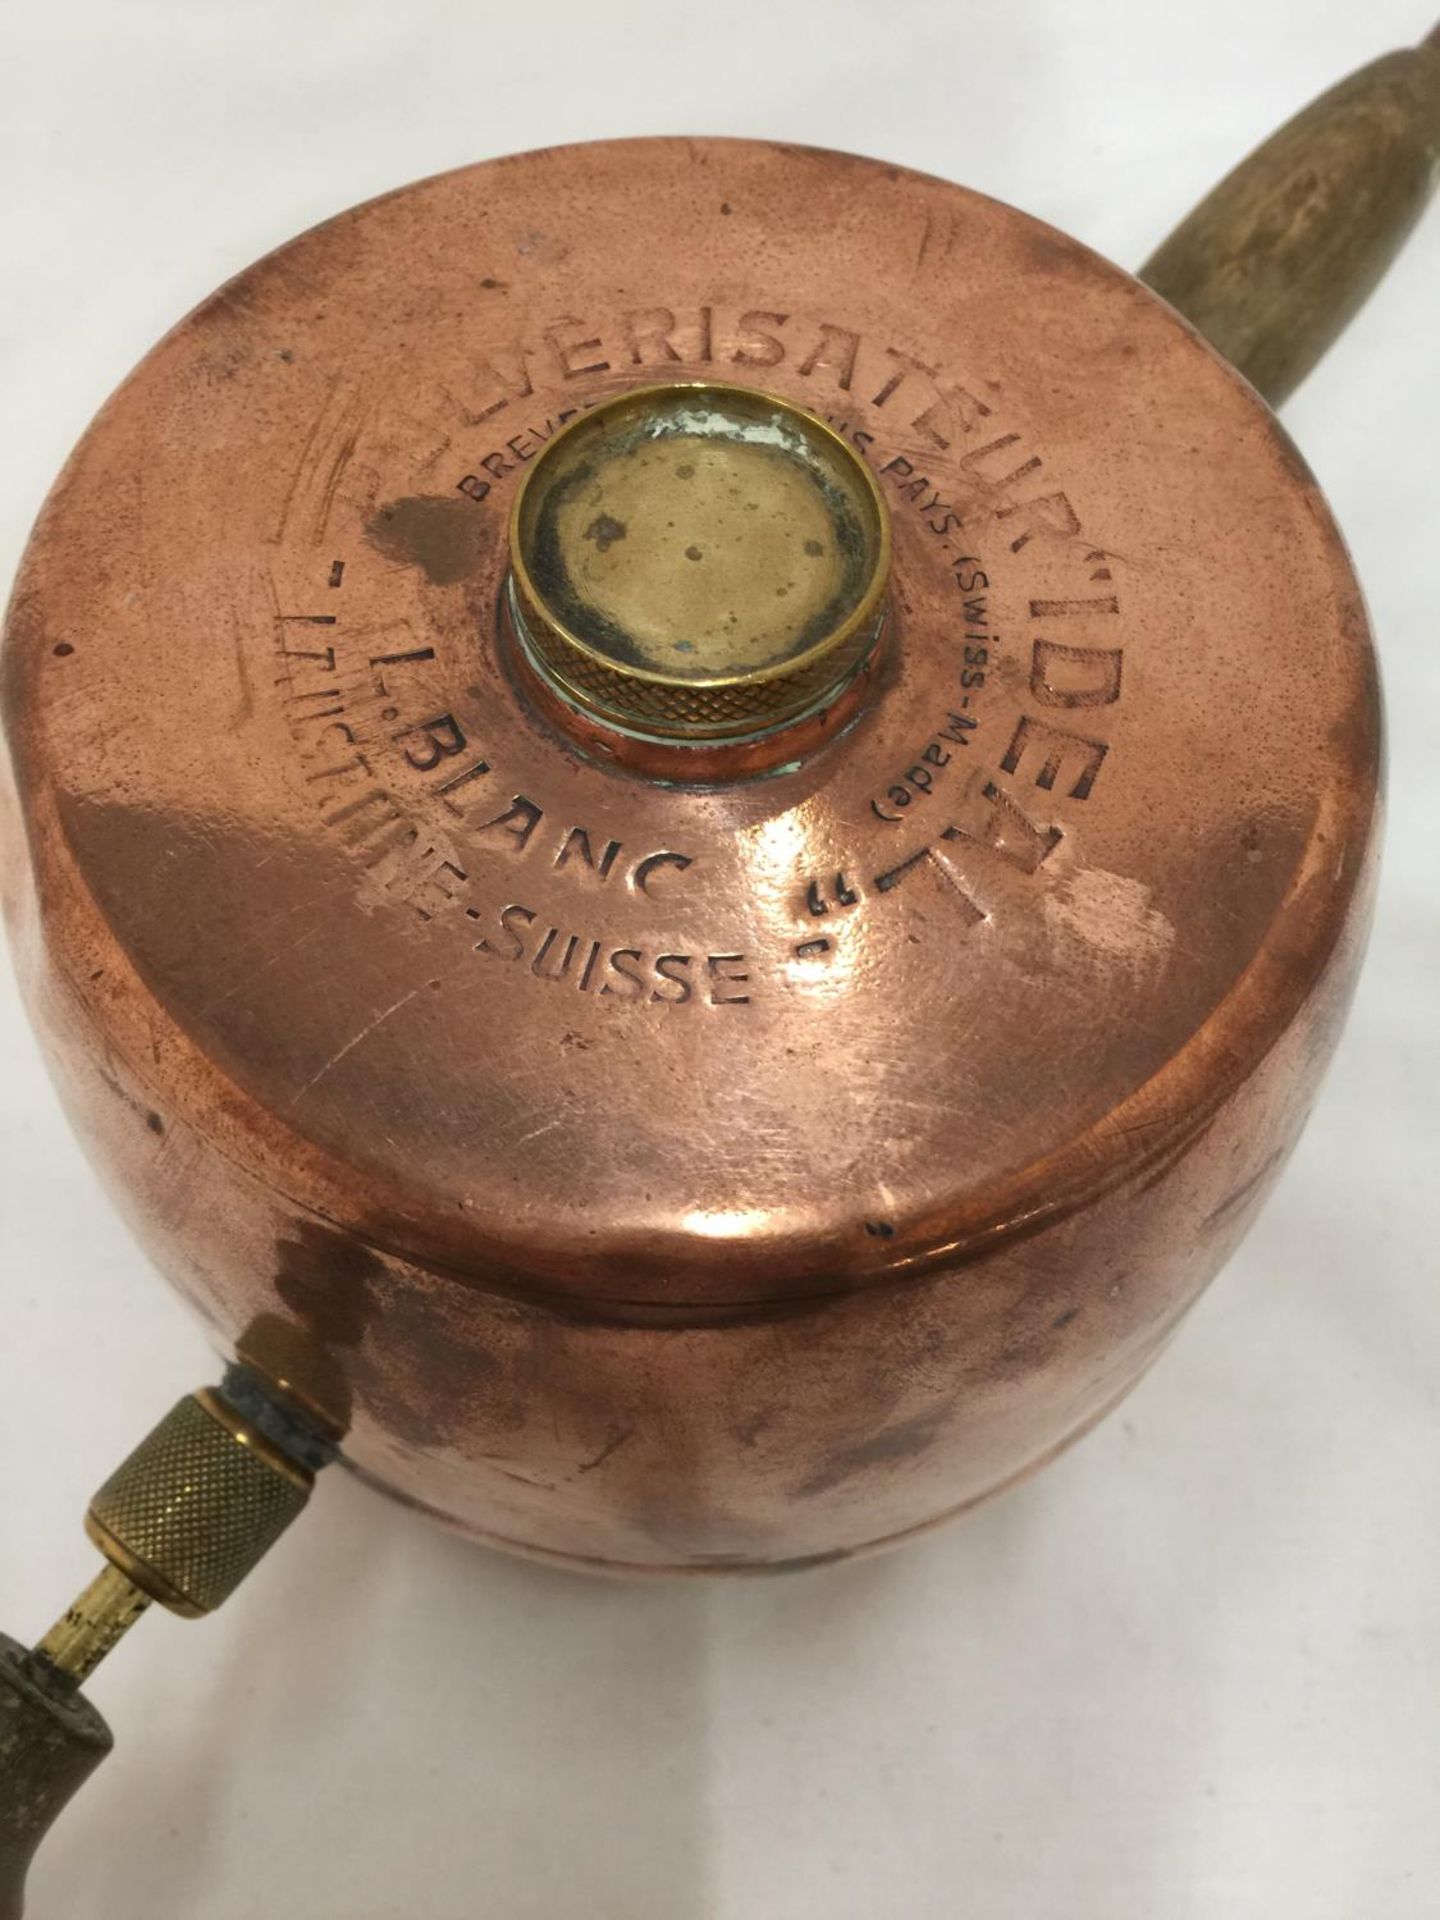 A VINTAGE COPPER SPRAYER MADE IN SWITZERLAND - Image 3 of 4